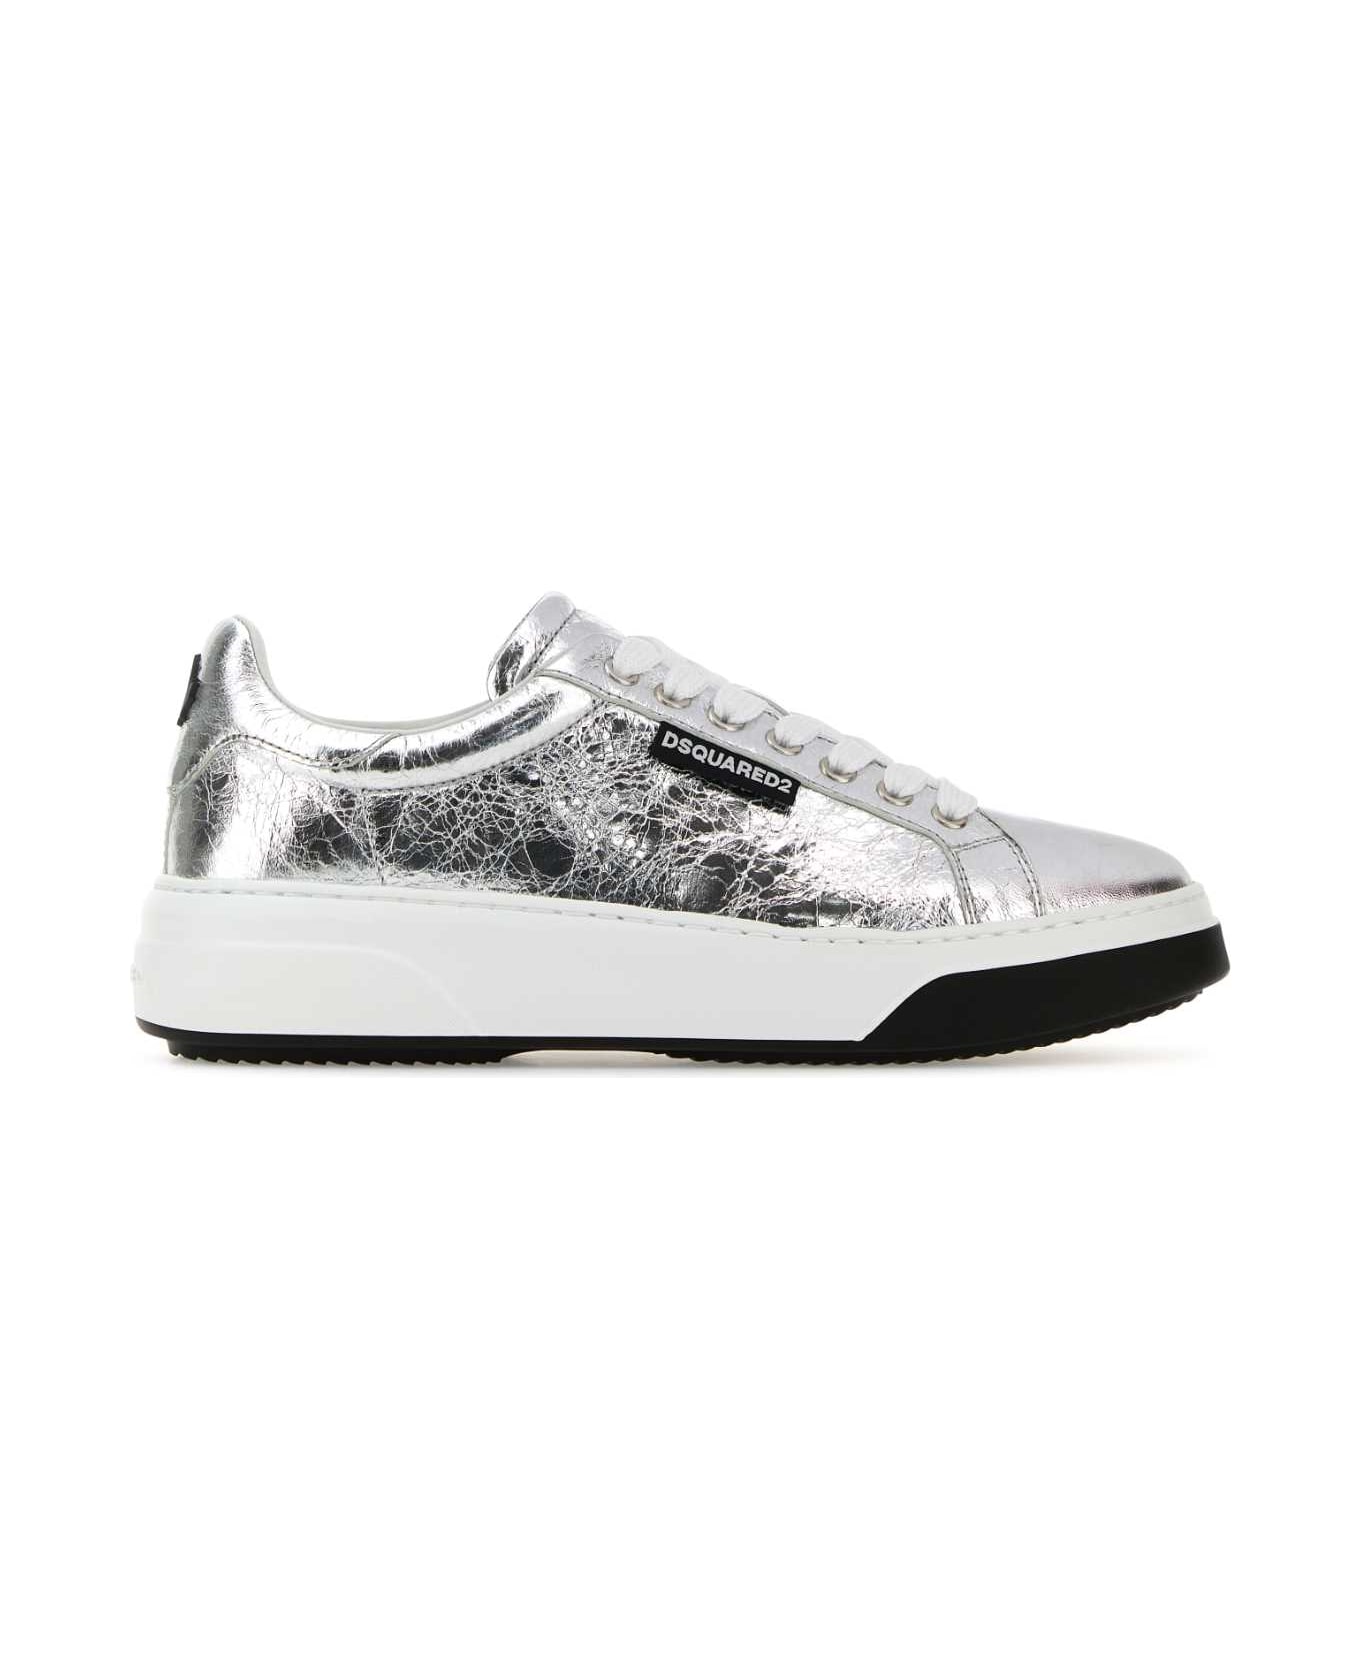 Dsquared2 Silver Leather Bumper Sneakers - ARGENTO